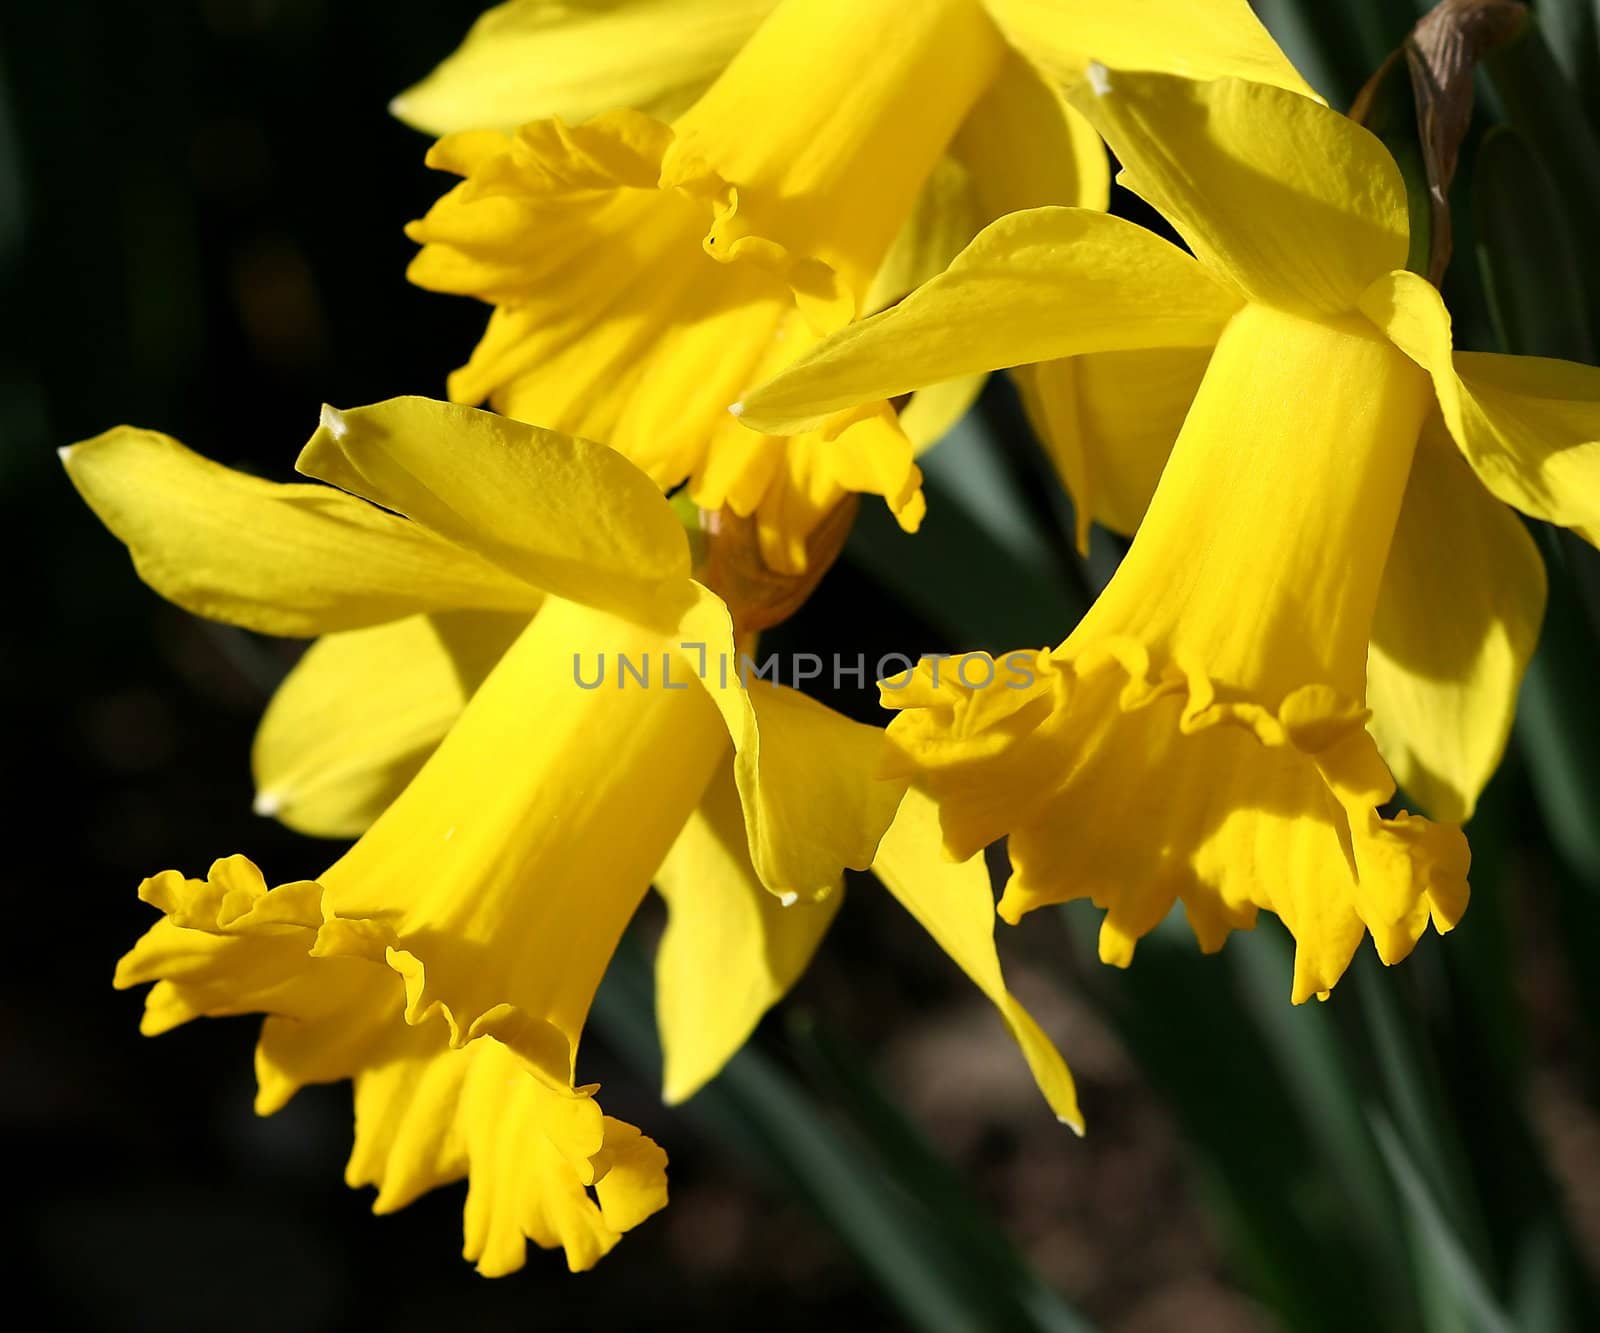 Daffodil by monner